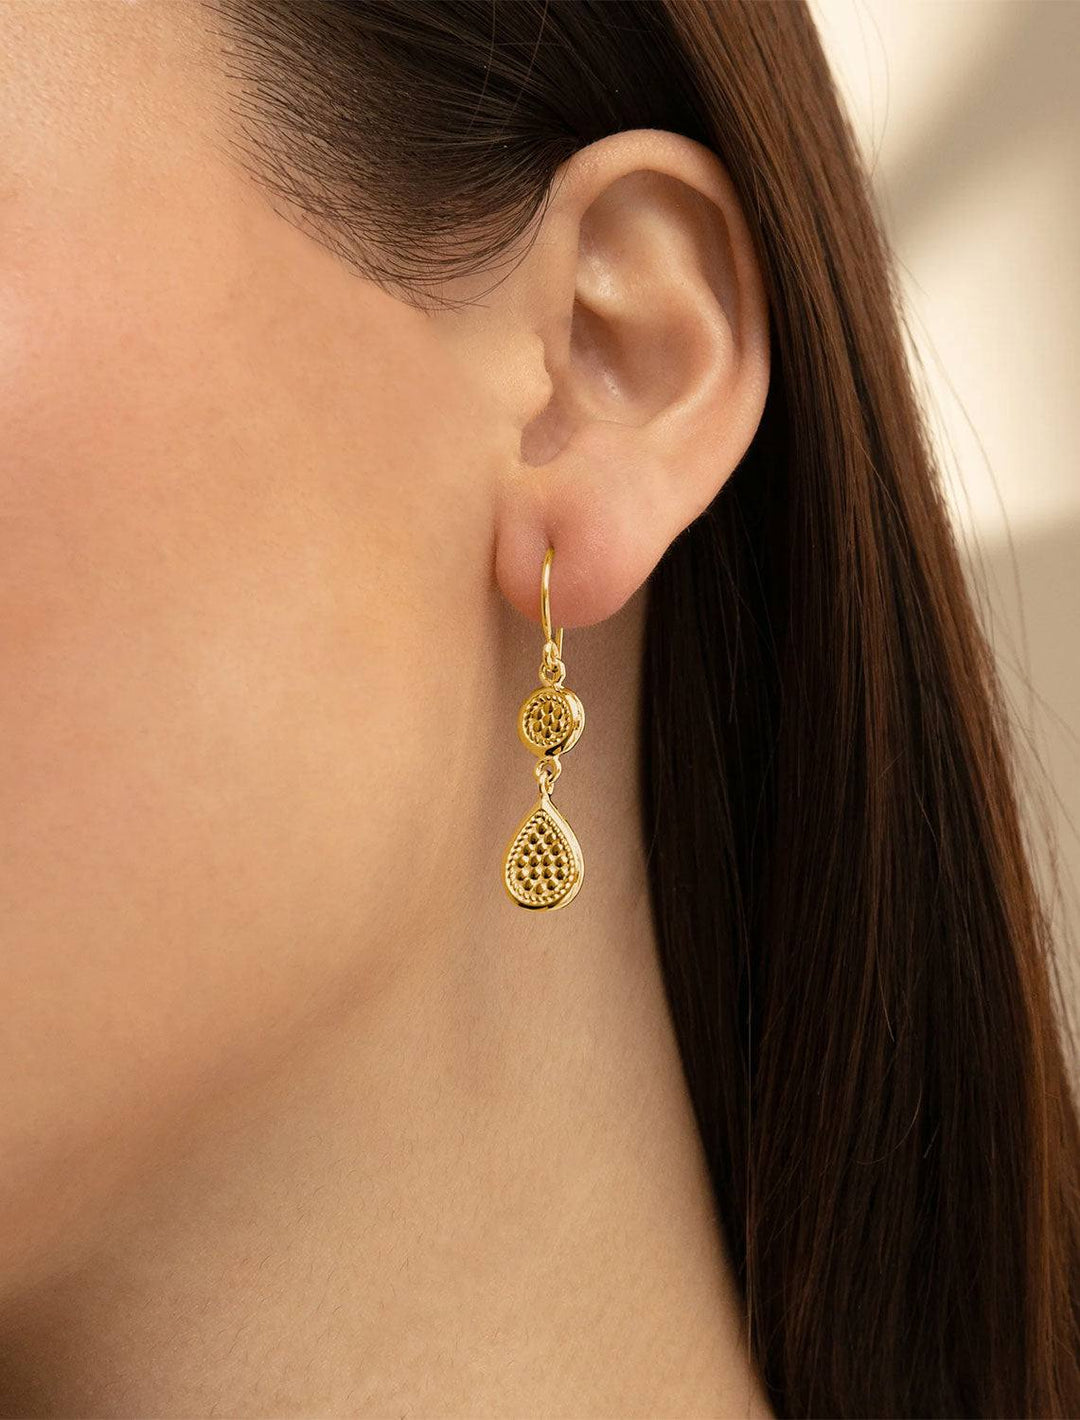 Model wearing Anna Beck's classic double drop earrings in gold.